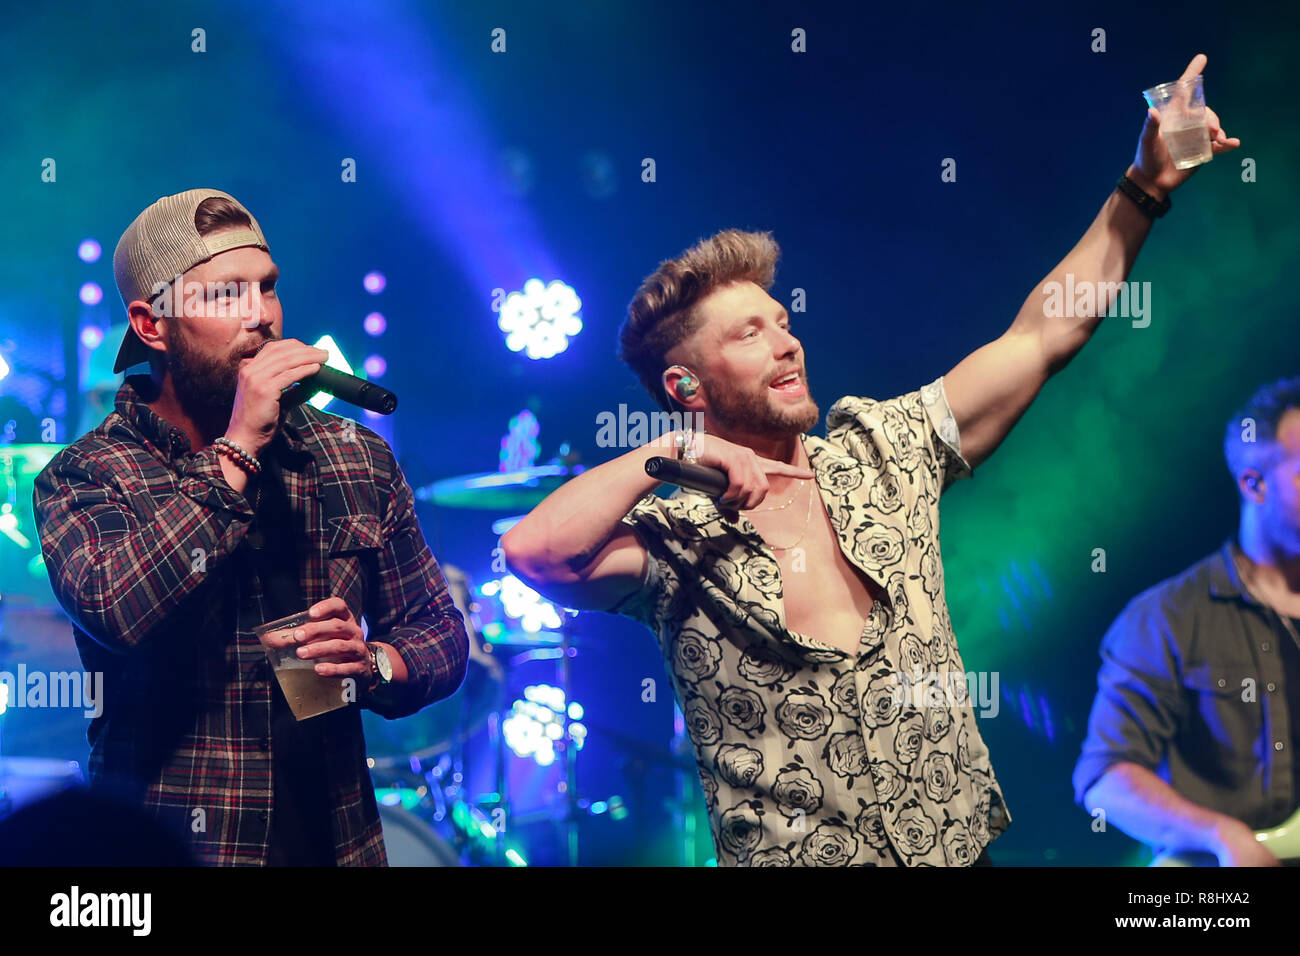 NEW YORK - DEC 13: Chris Lane (R) and brother Cory Lane perform in concert at Irving Plaza on December 13, 2018 in New York City Stock Photo